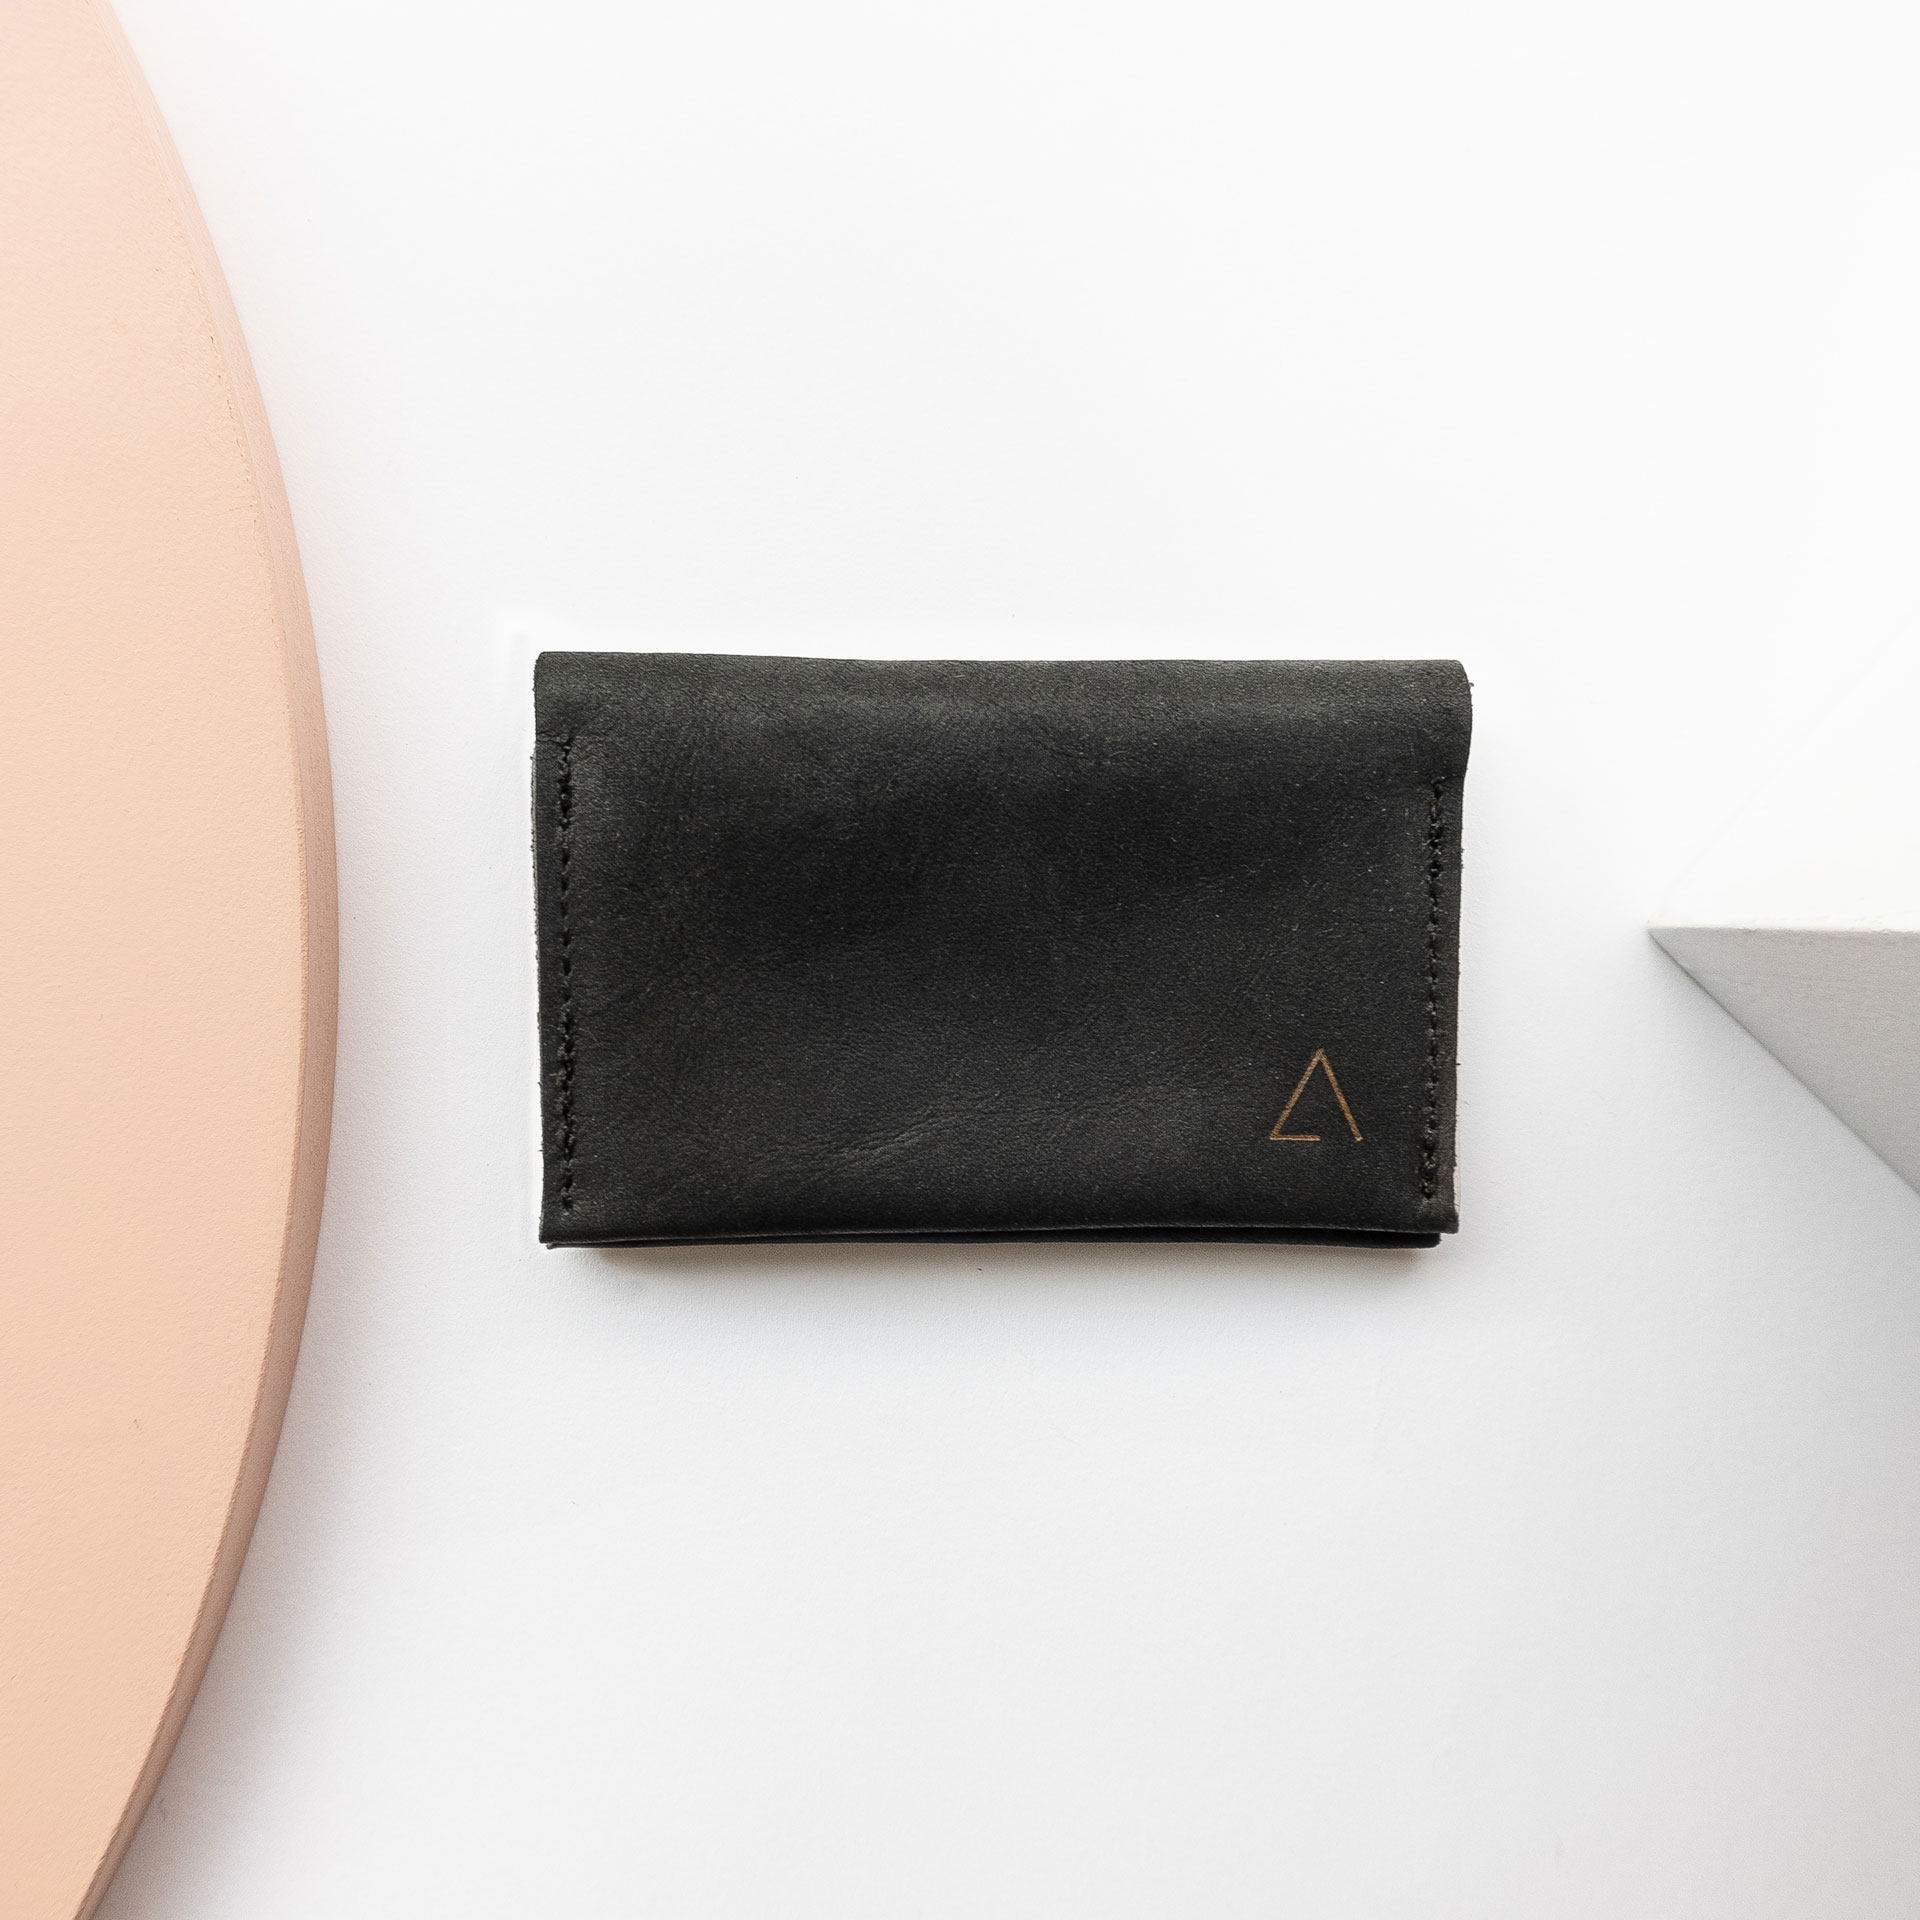 OLI MIDI sustainable natural leather wallet in charcoal with gold logo embossing